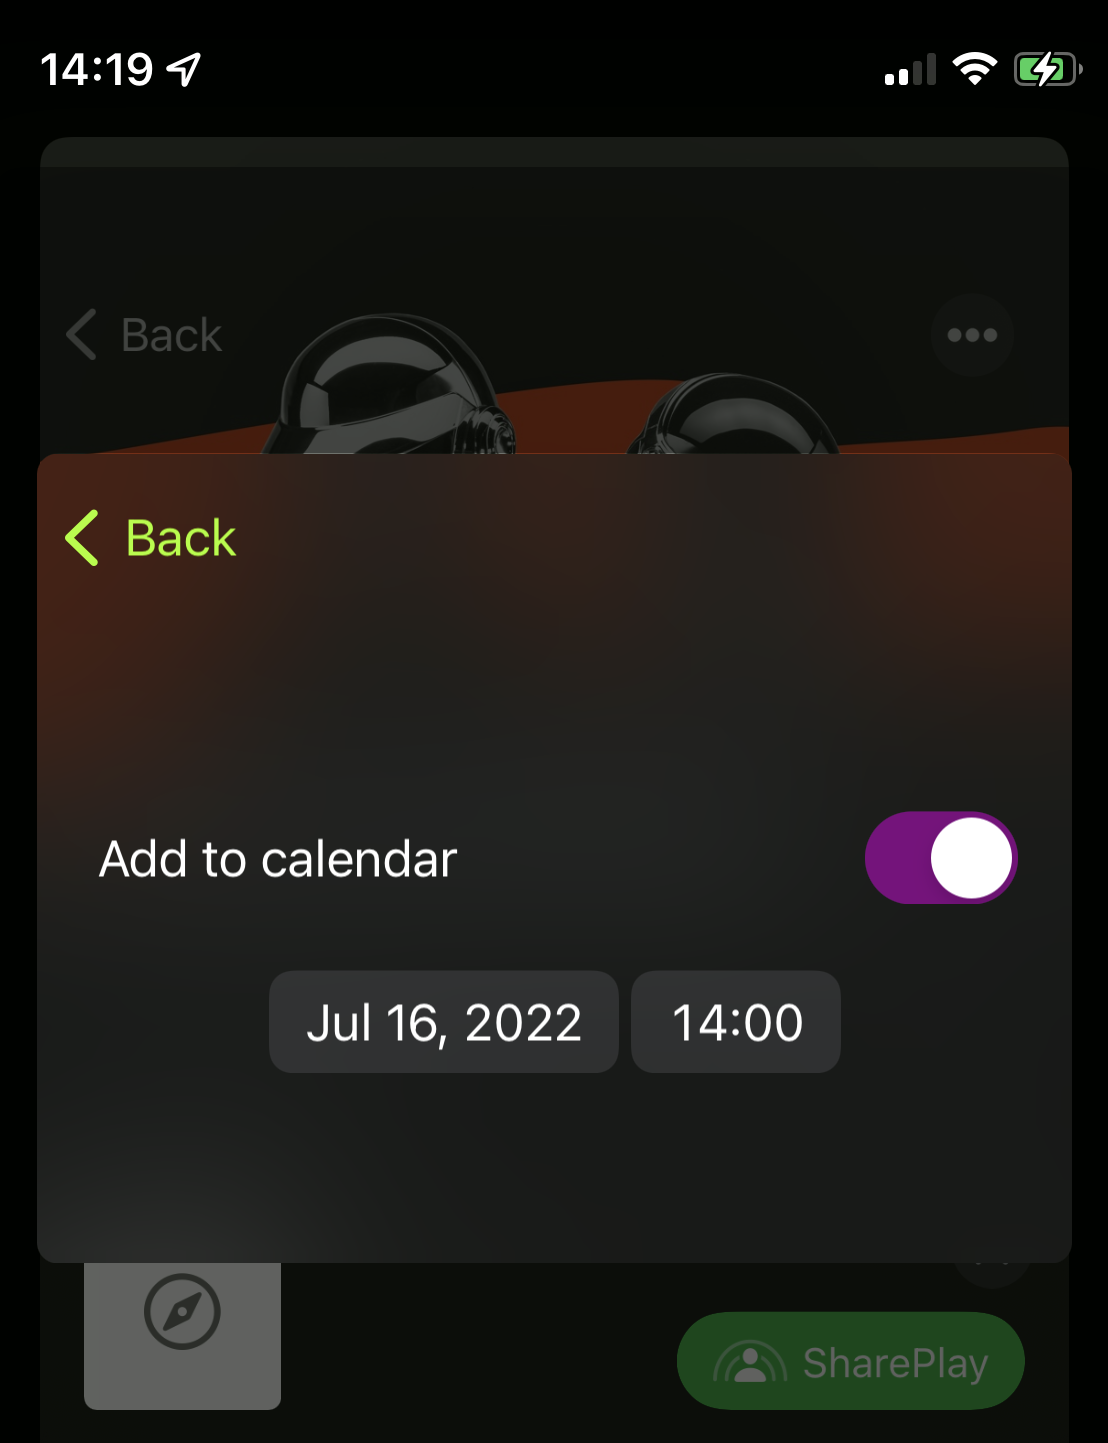 Date and time selection are shown